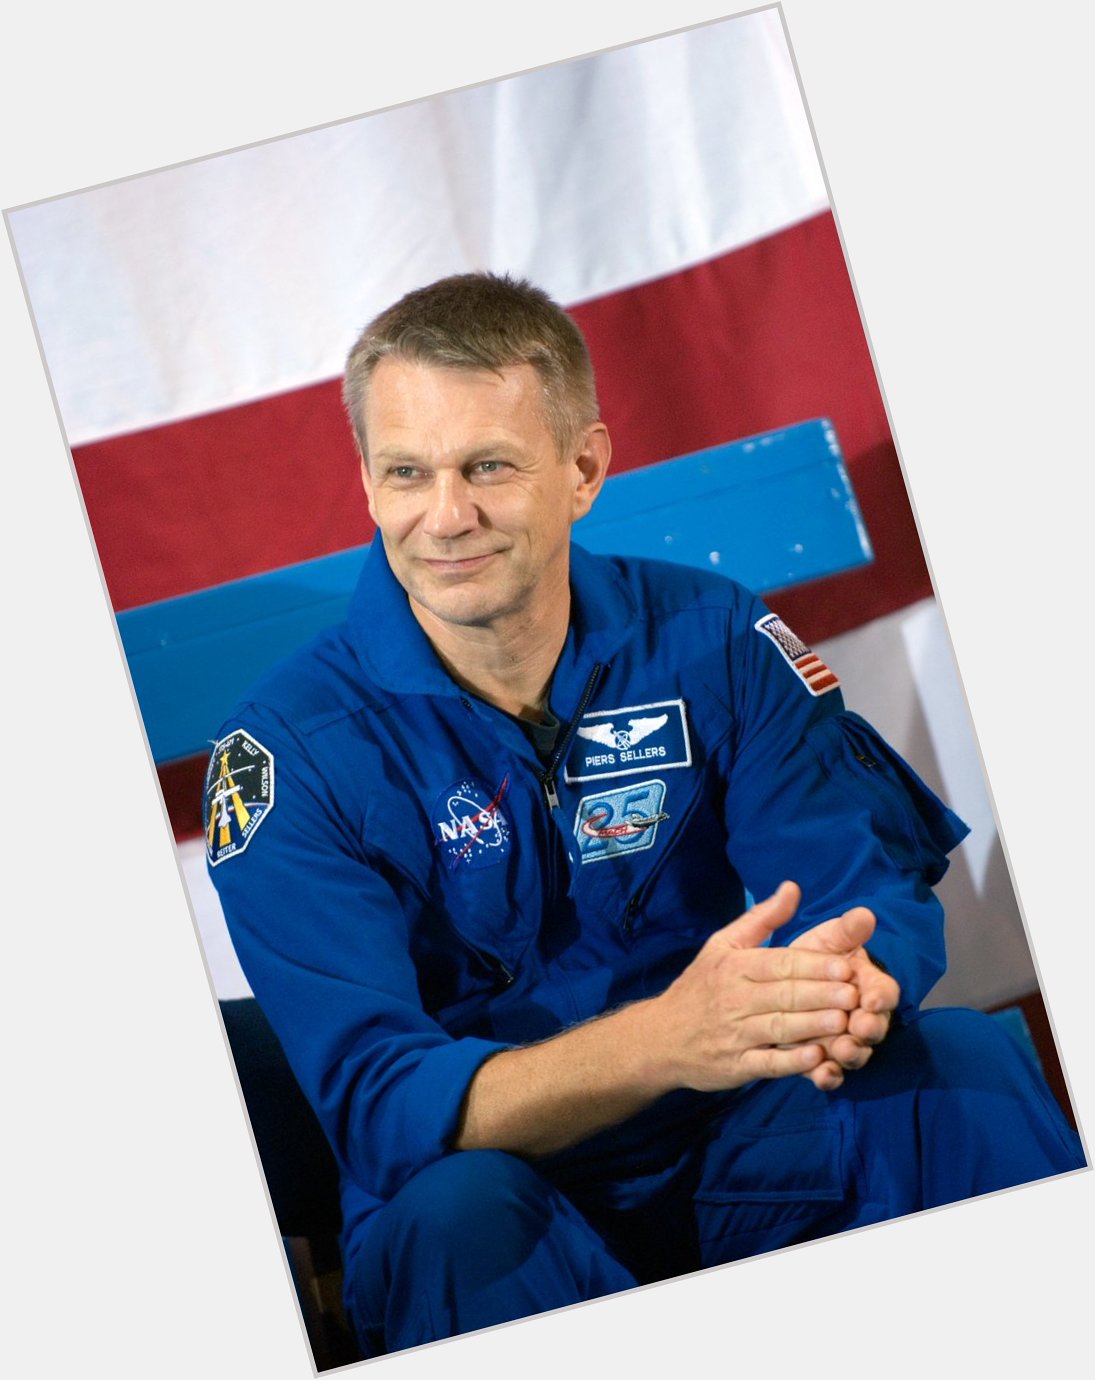 Happy birthday to a great scientist, astronaut, friend . . . . Human. RIP Piers Sellers. 